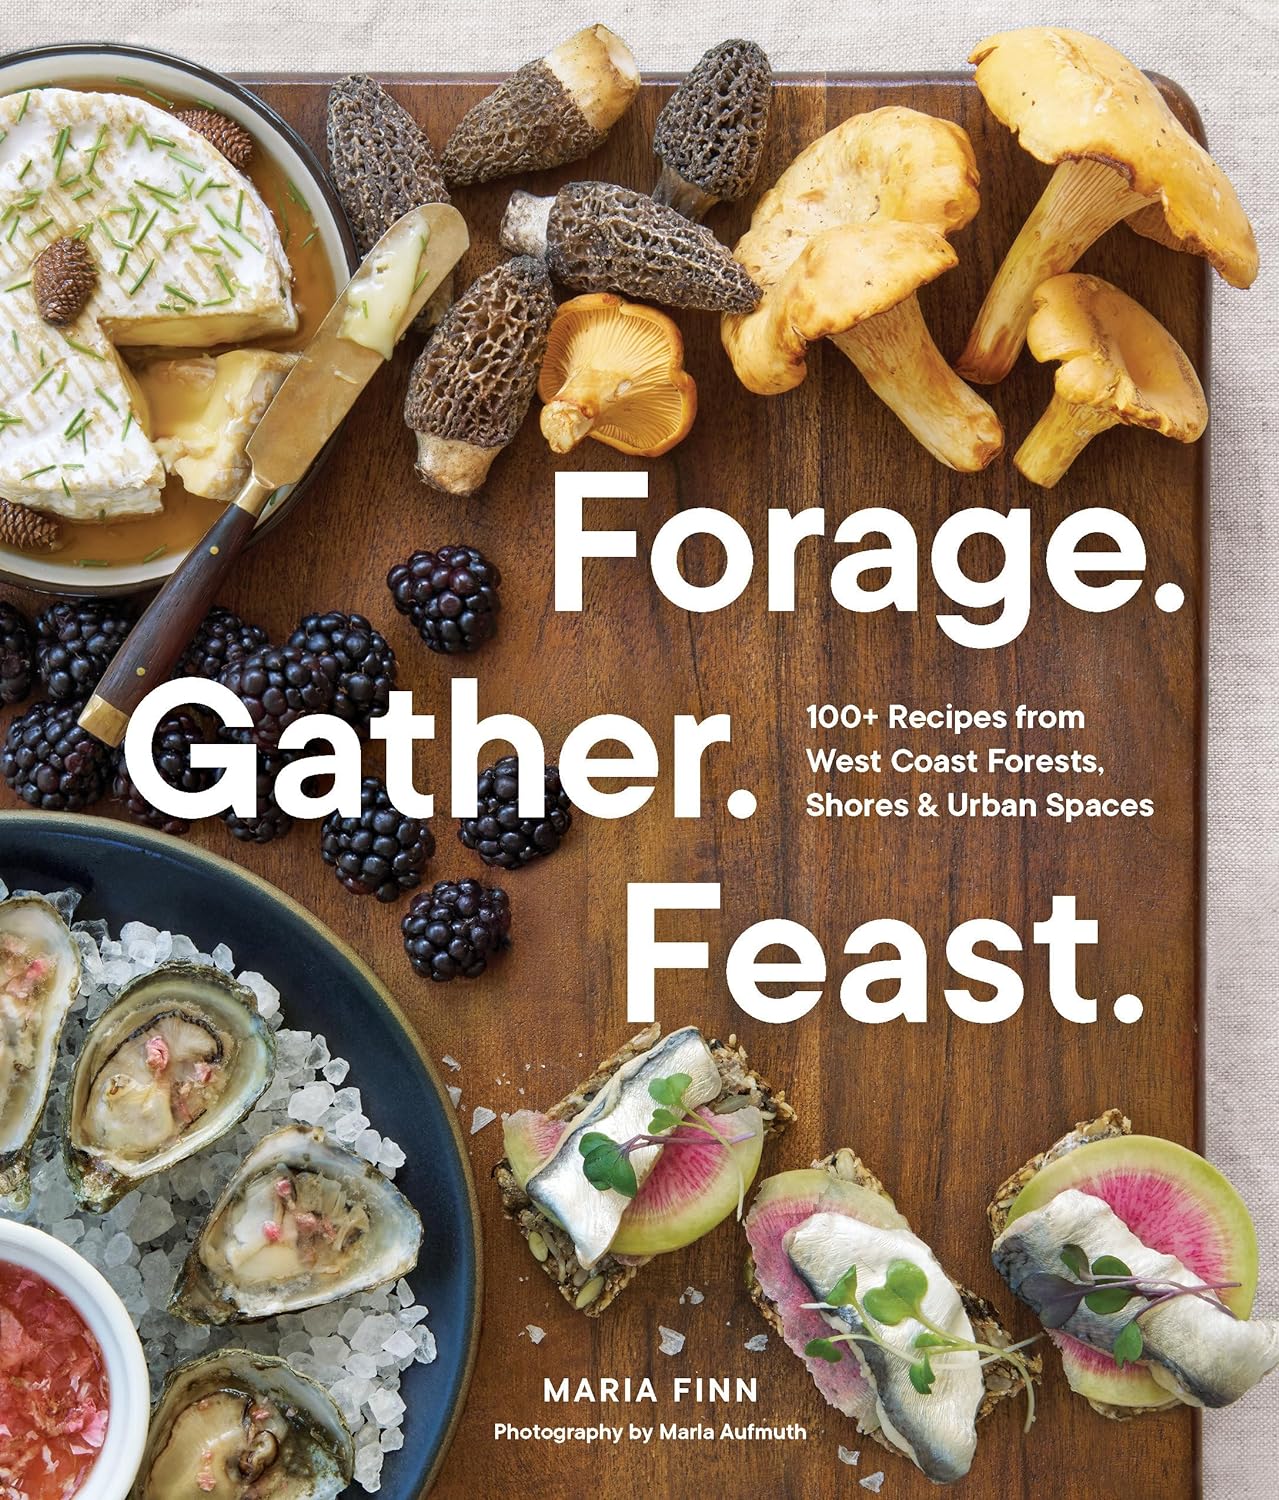 Forage. Gather. Feast.: 100+ Recipes from West Coast Forests, Shores, and Urban Spaces (Maria Finn)